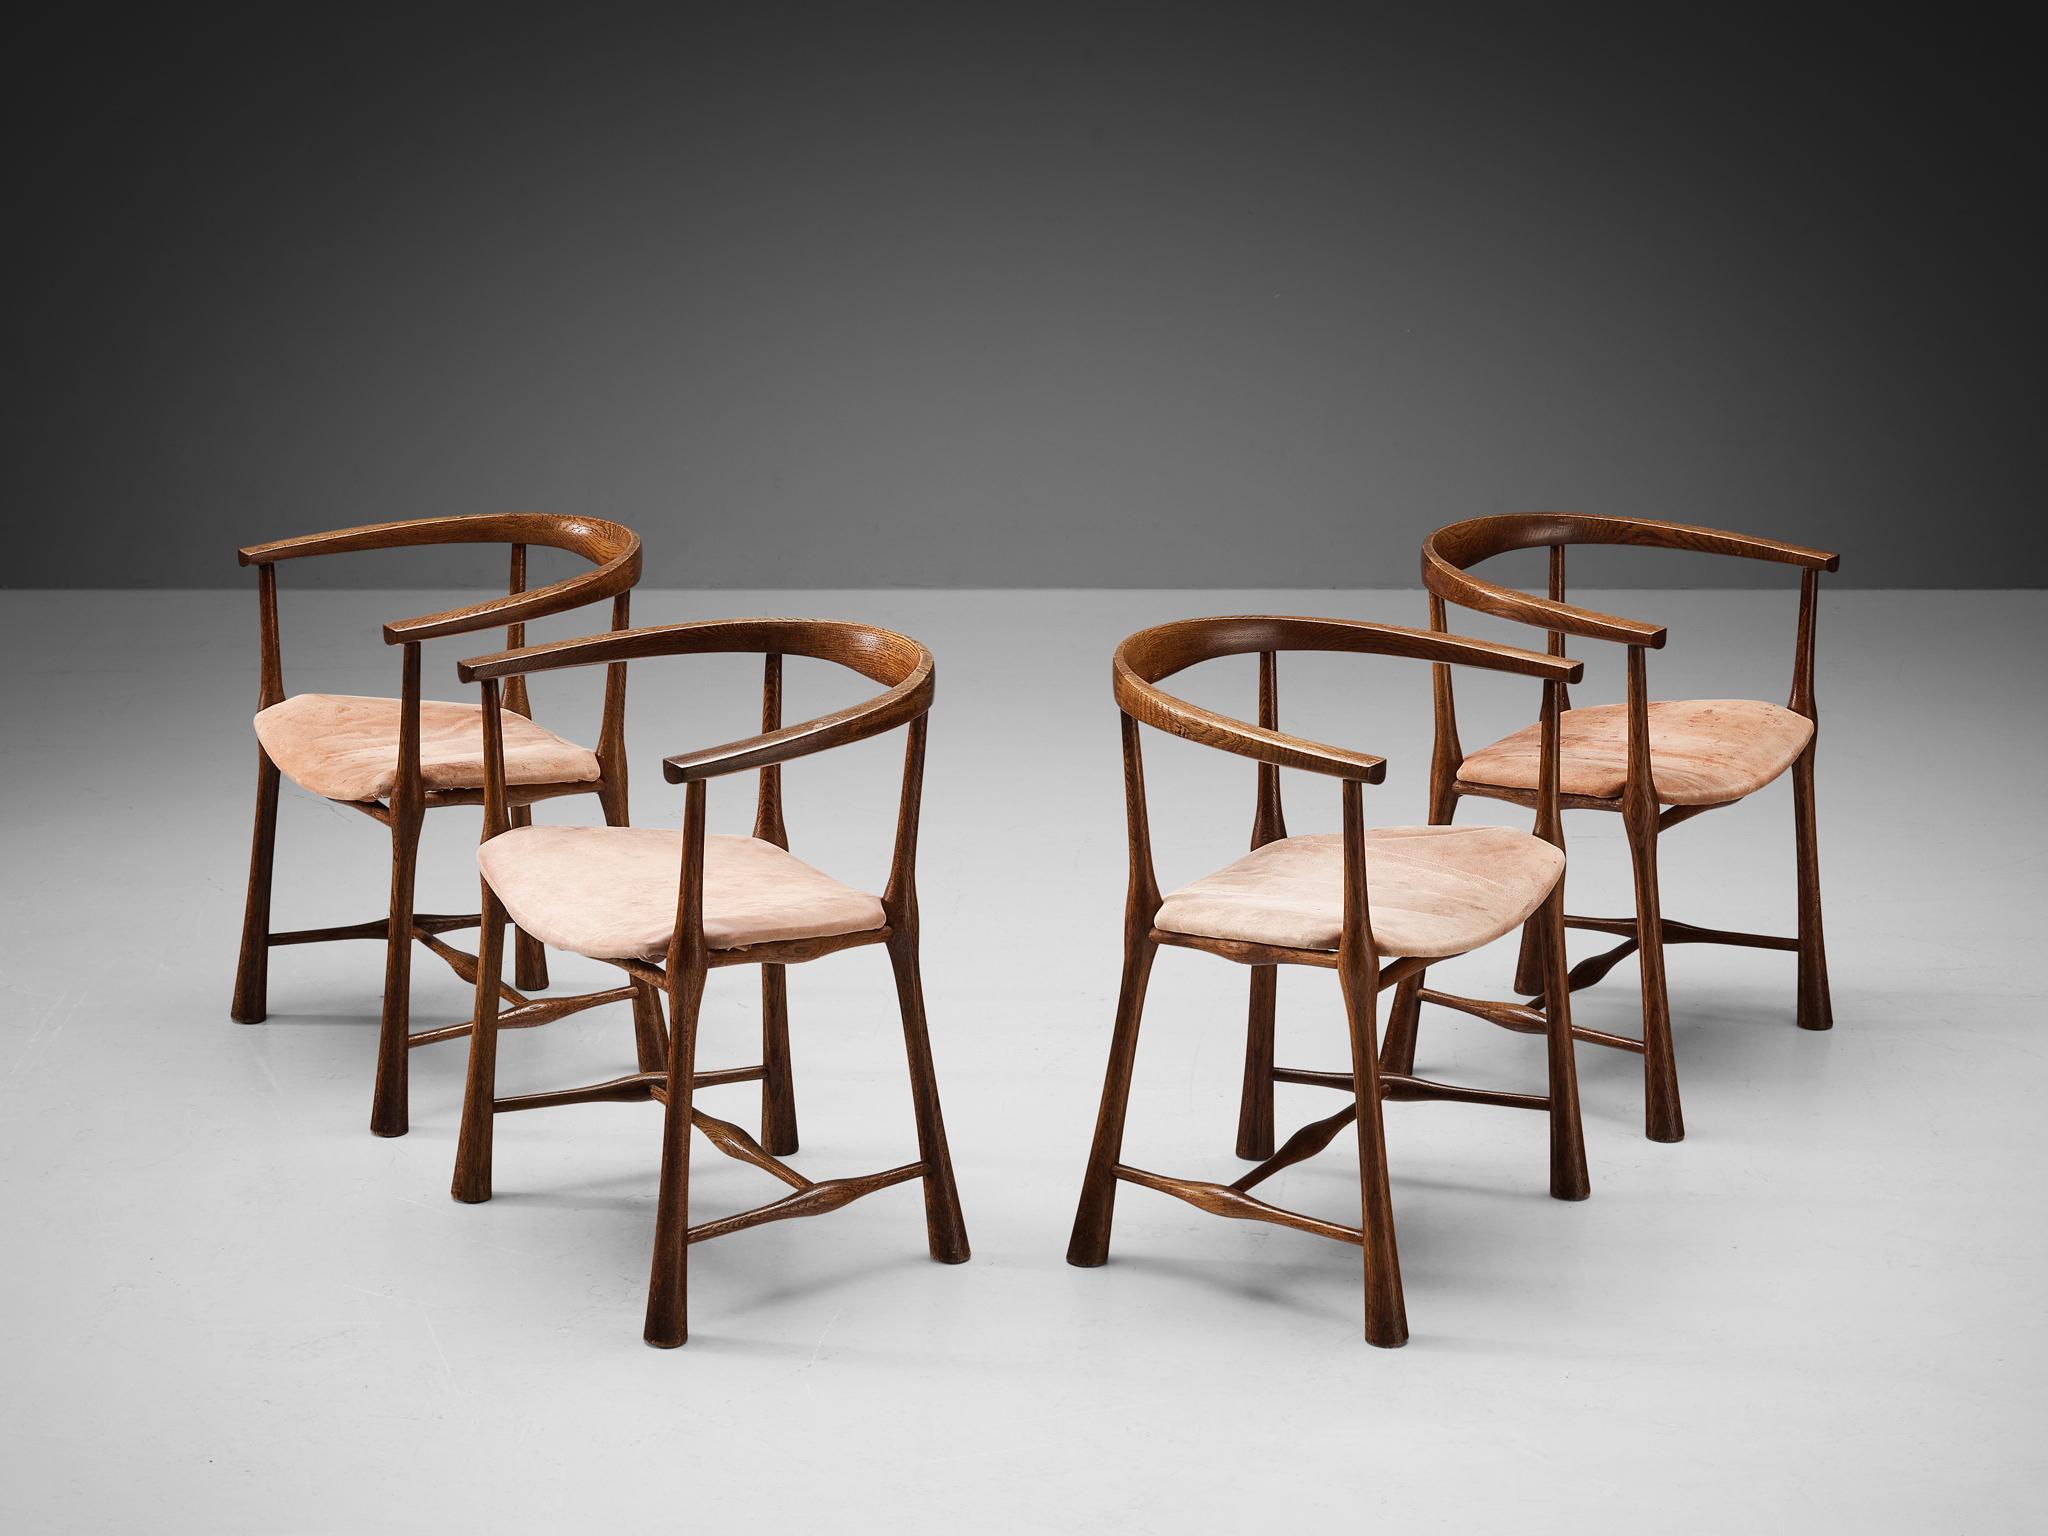 Jens Harald Quistgaard for Nissen Langå, set of four dining chairs model 530, oak, suede, Denmark, design 1964-65

Danish sculptor and designer Jens Harald Quistgaard (1919-2008) is particularly known for designing kitchenware and tableware.